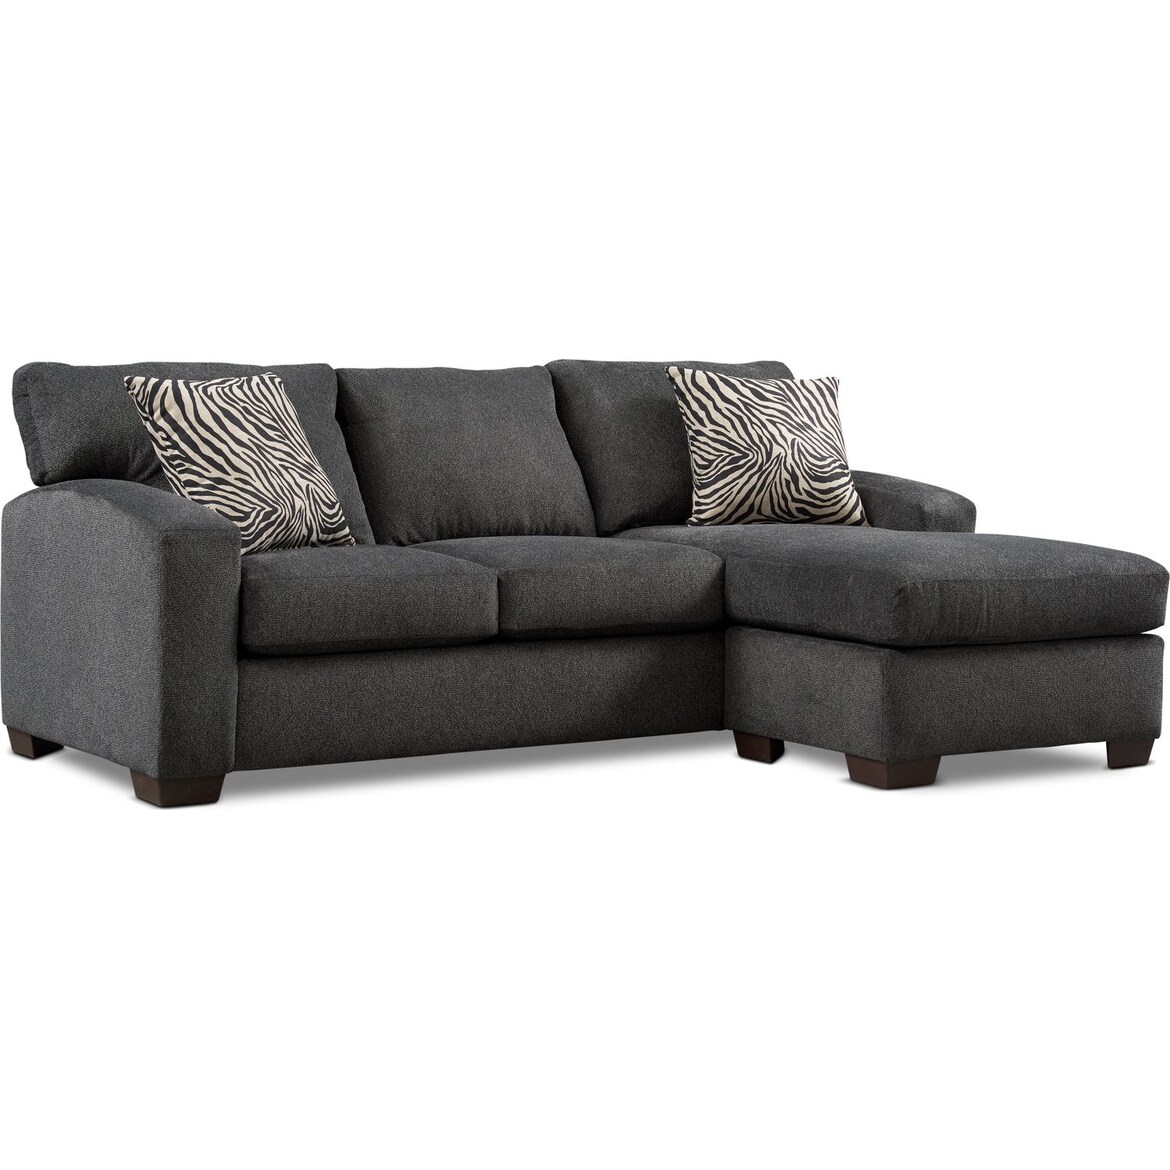 Nala 2 Piece Sectional With Chaise Value City Furniture And